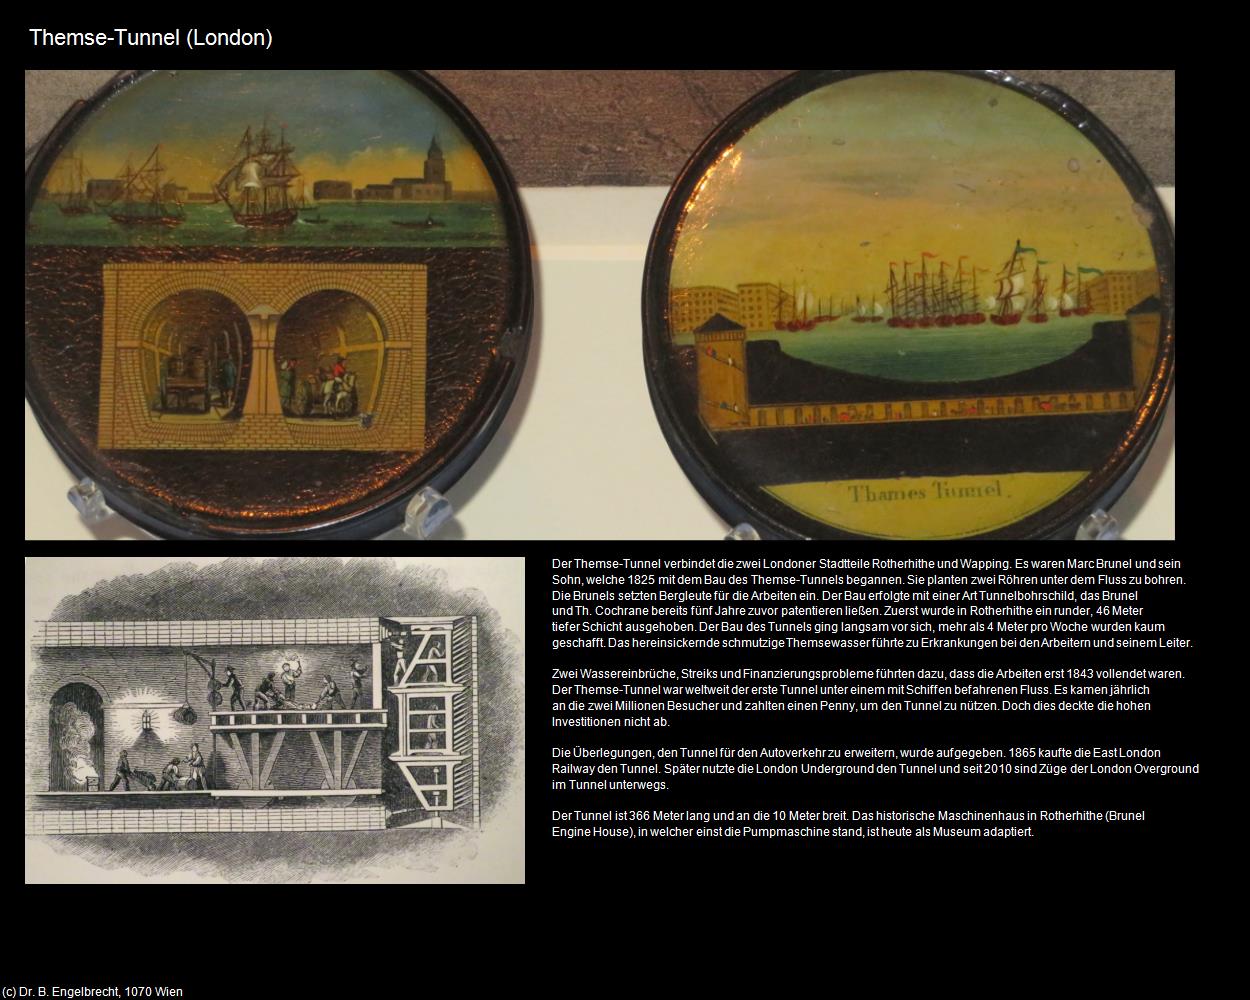 Themse-Tunnel  (London, England) in Kulturatlas-ENGLAND und WALES